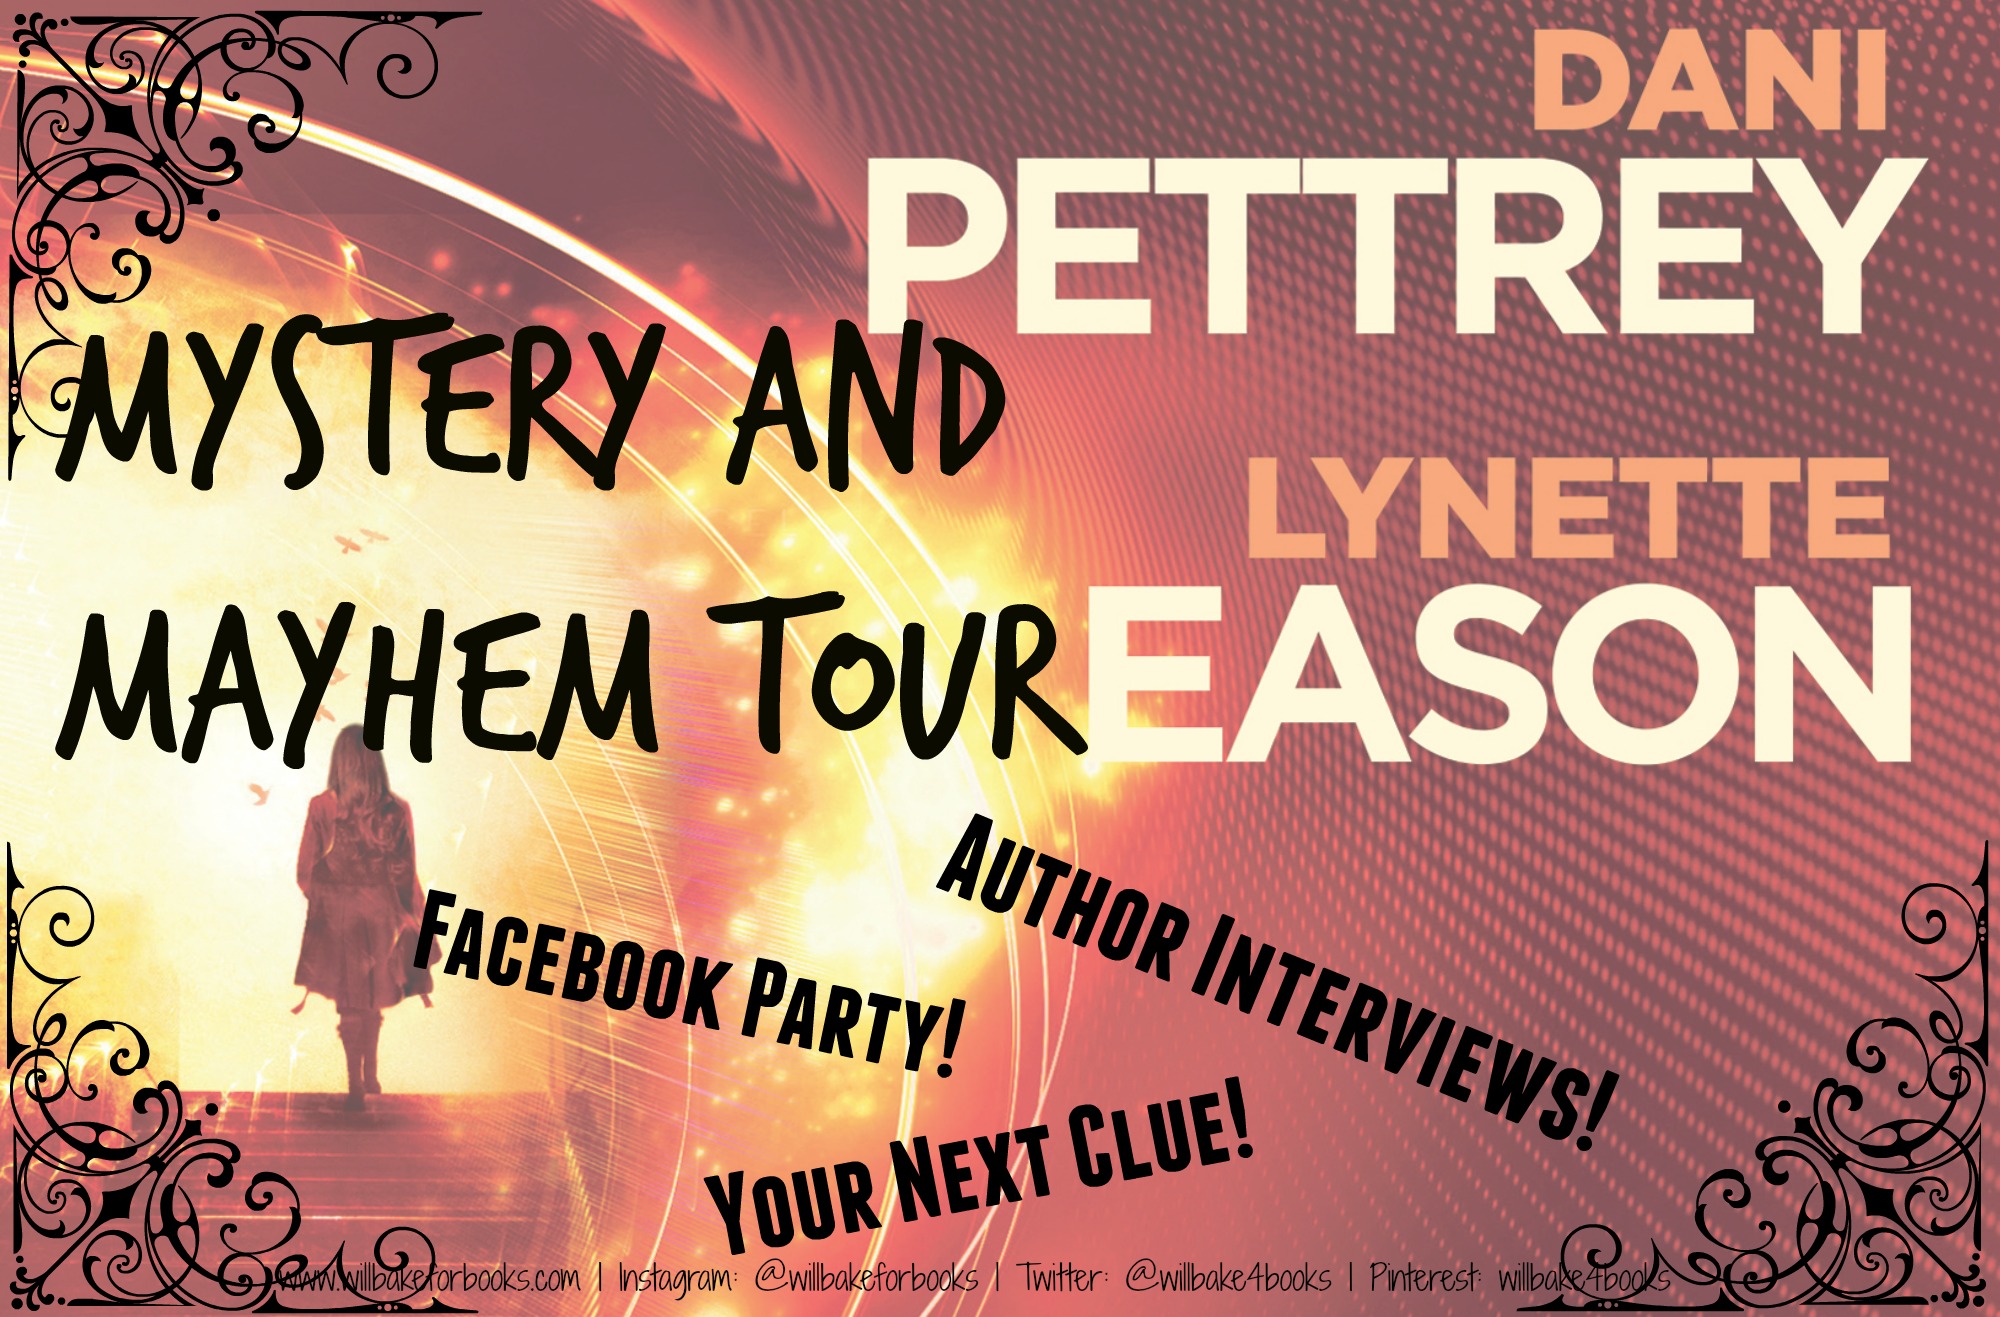 Mystery and Mayhem Tour: Author Interviews with Dani Pettrey and Lynette Eason!